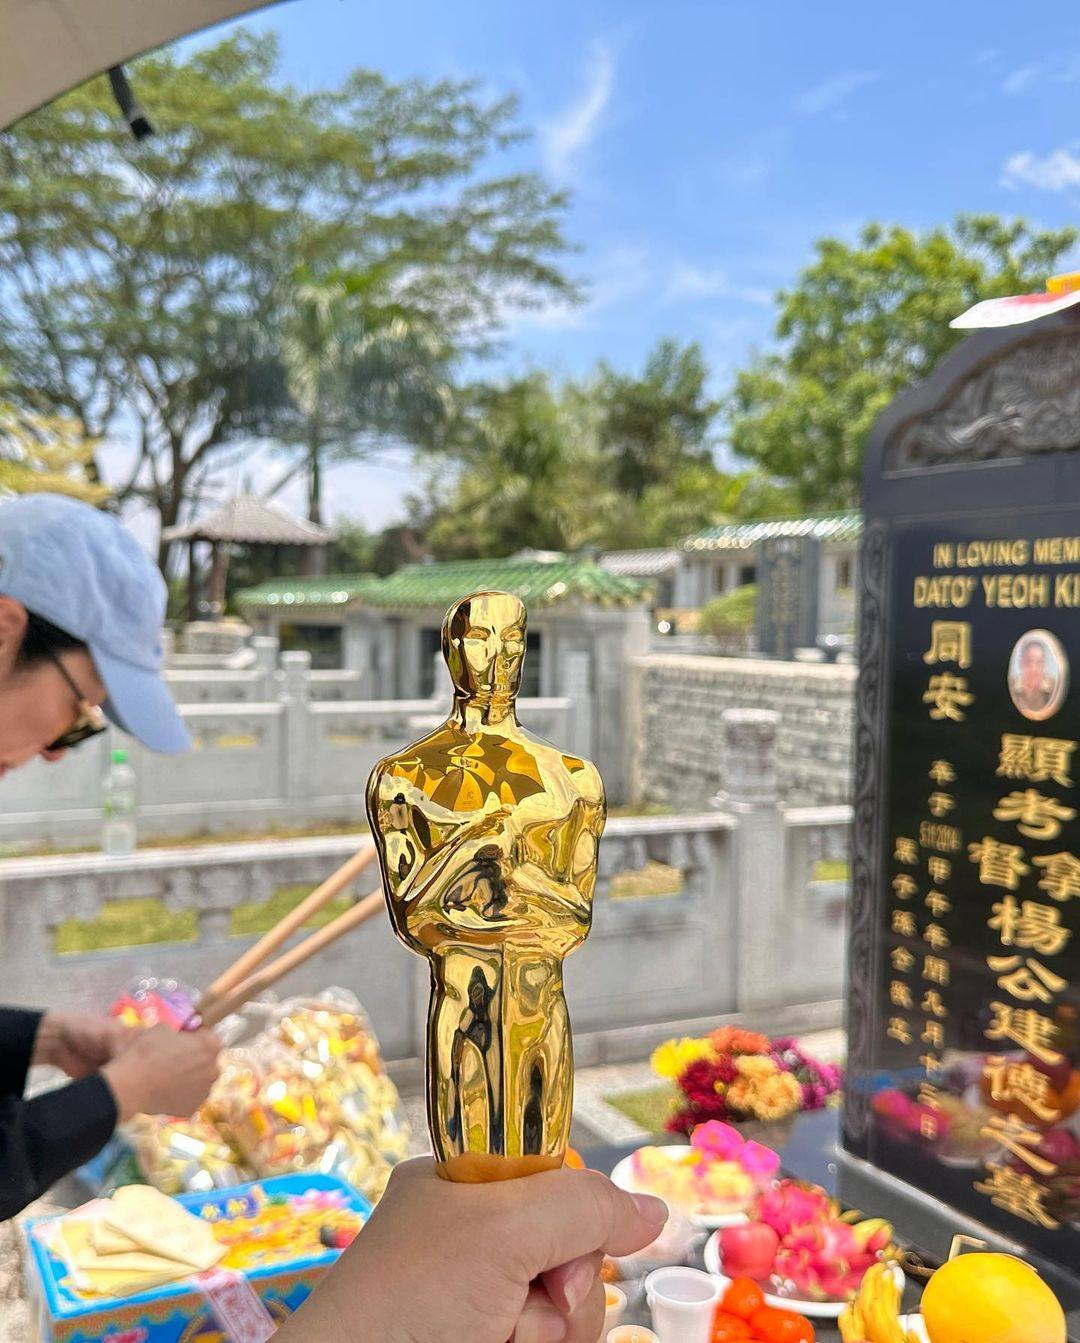 Actress Michelle Yeoh holds the Oscar trophy next to her late father’s grave. Photo: Instagram/michelleyeoh_official